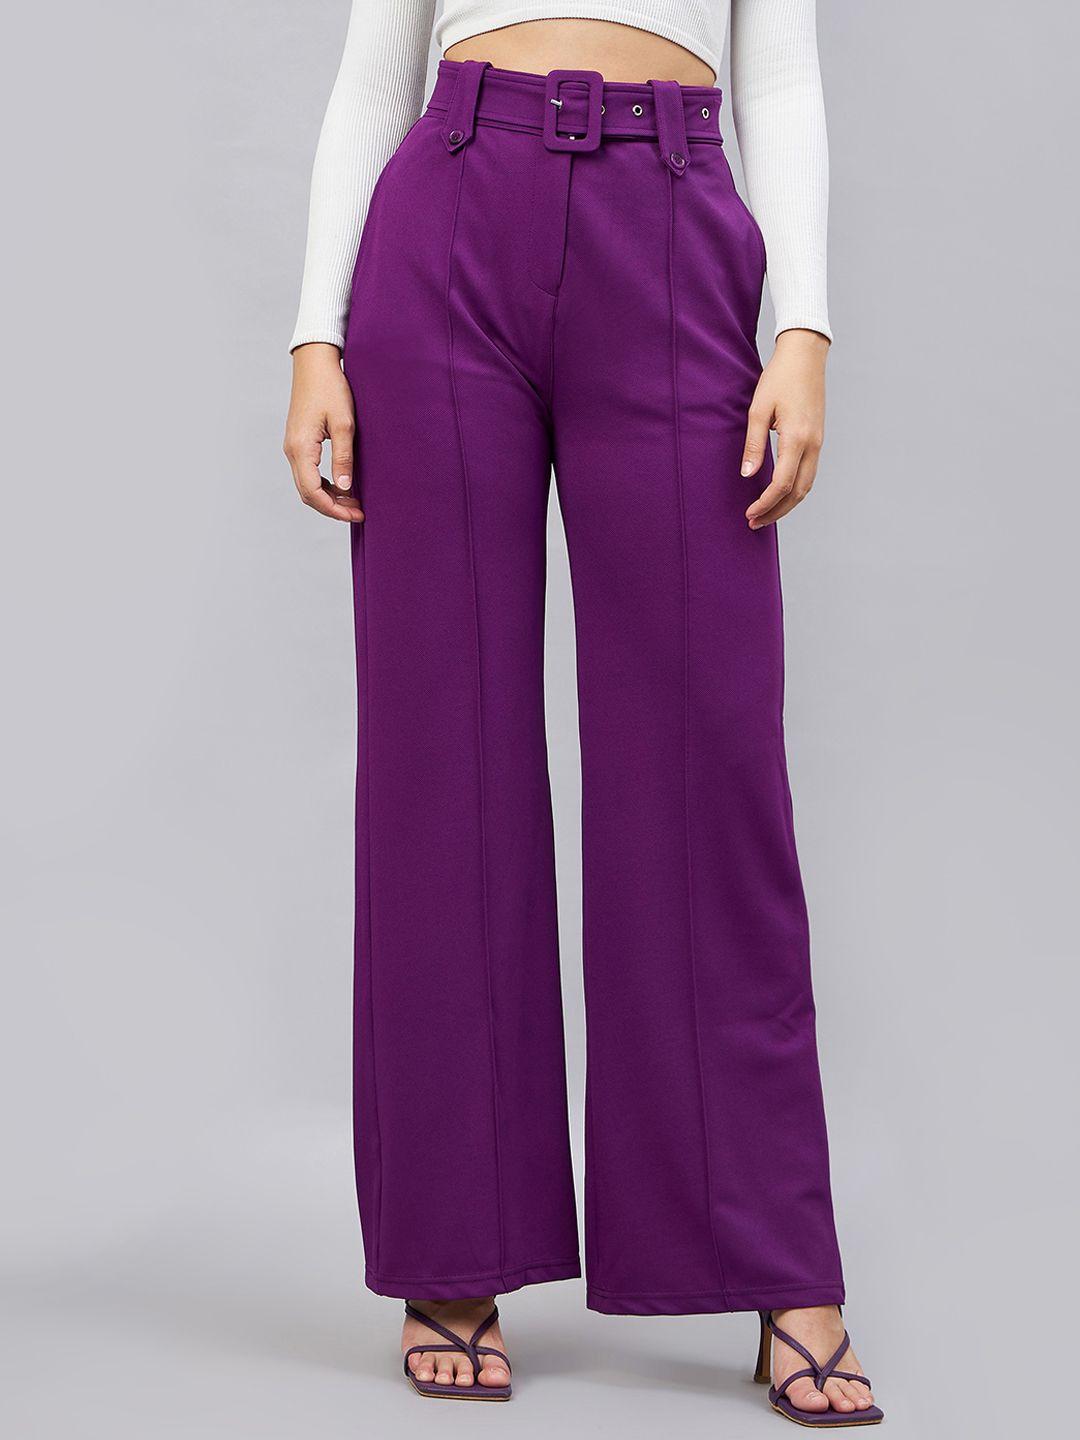 orchid-hues-women-flared-high-rise-trousers